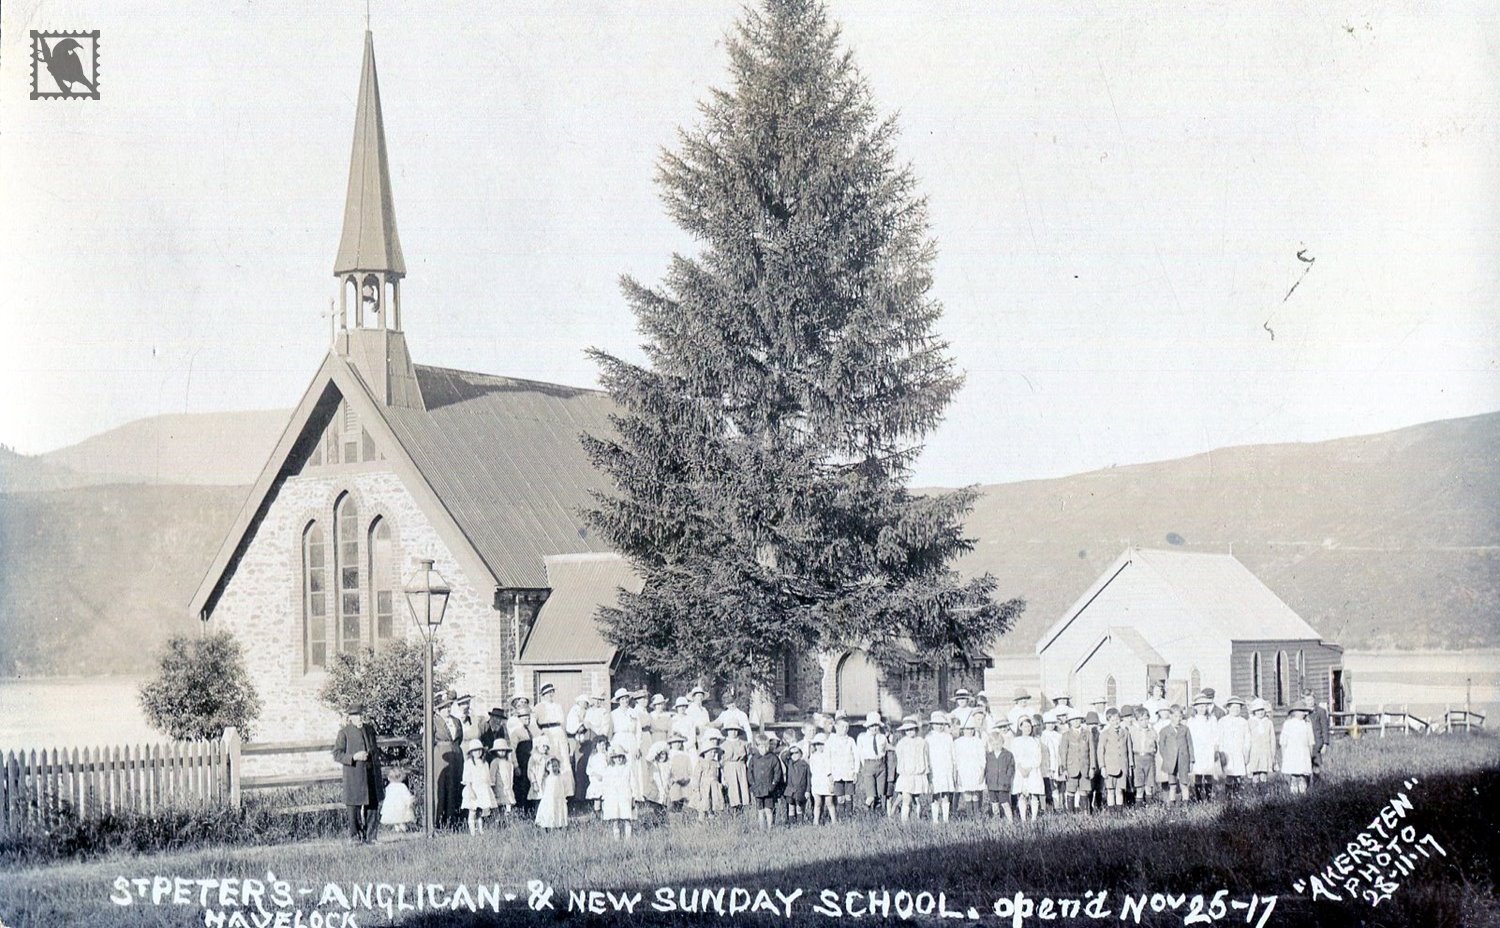 St Peter's Anglican Church & New Sunday School Havelock